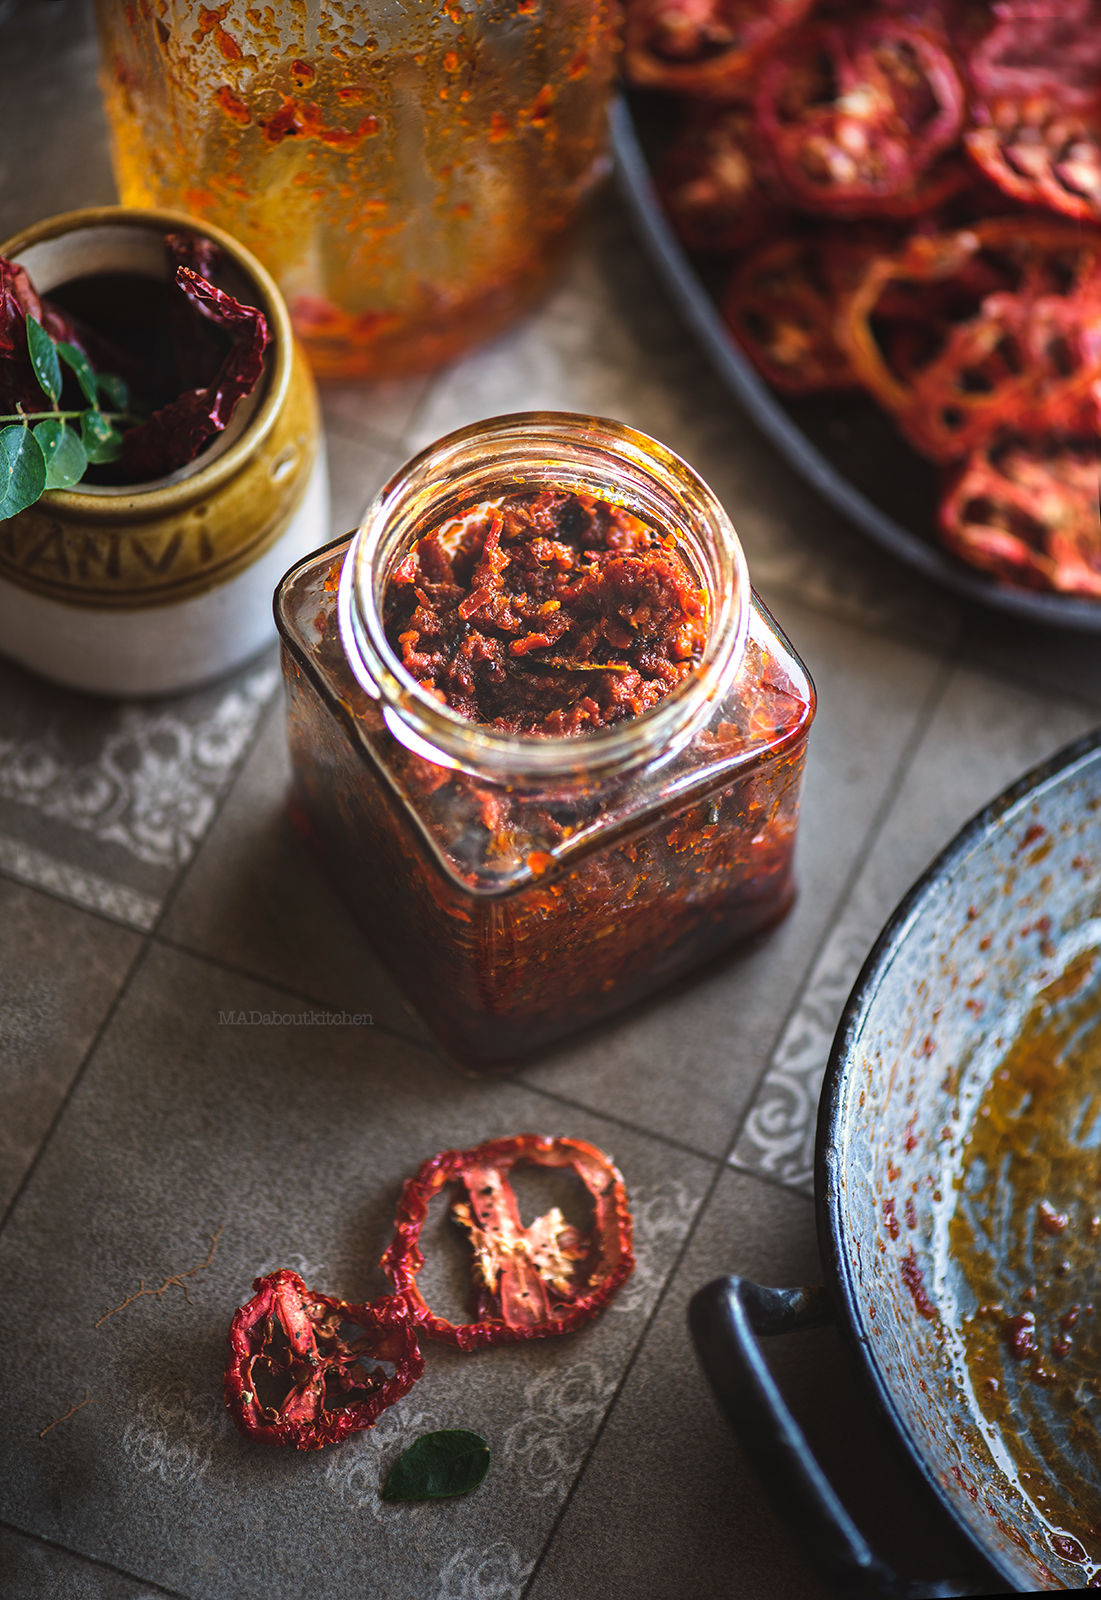 Sun-dried Tomato Pickle, Tomato Oorgaayi is a pickle made using sun-dried tomatoes during summer. It is a spicy tangy pickle with loads of garlic in it.